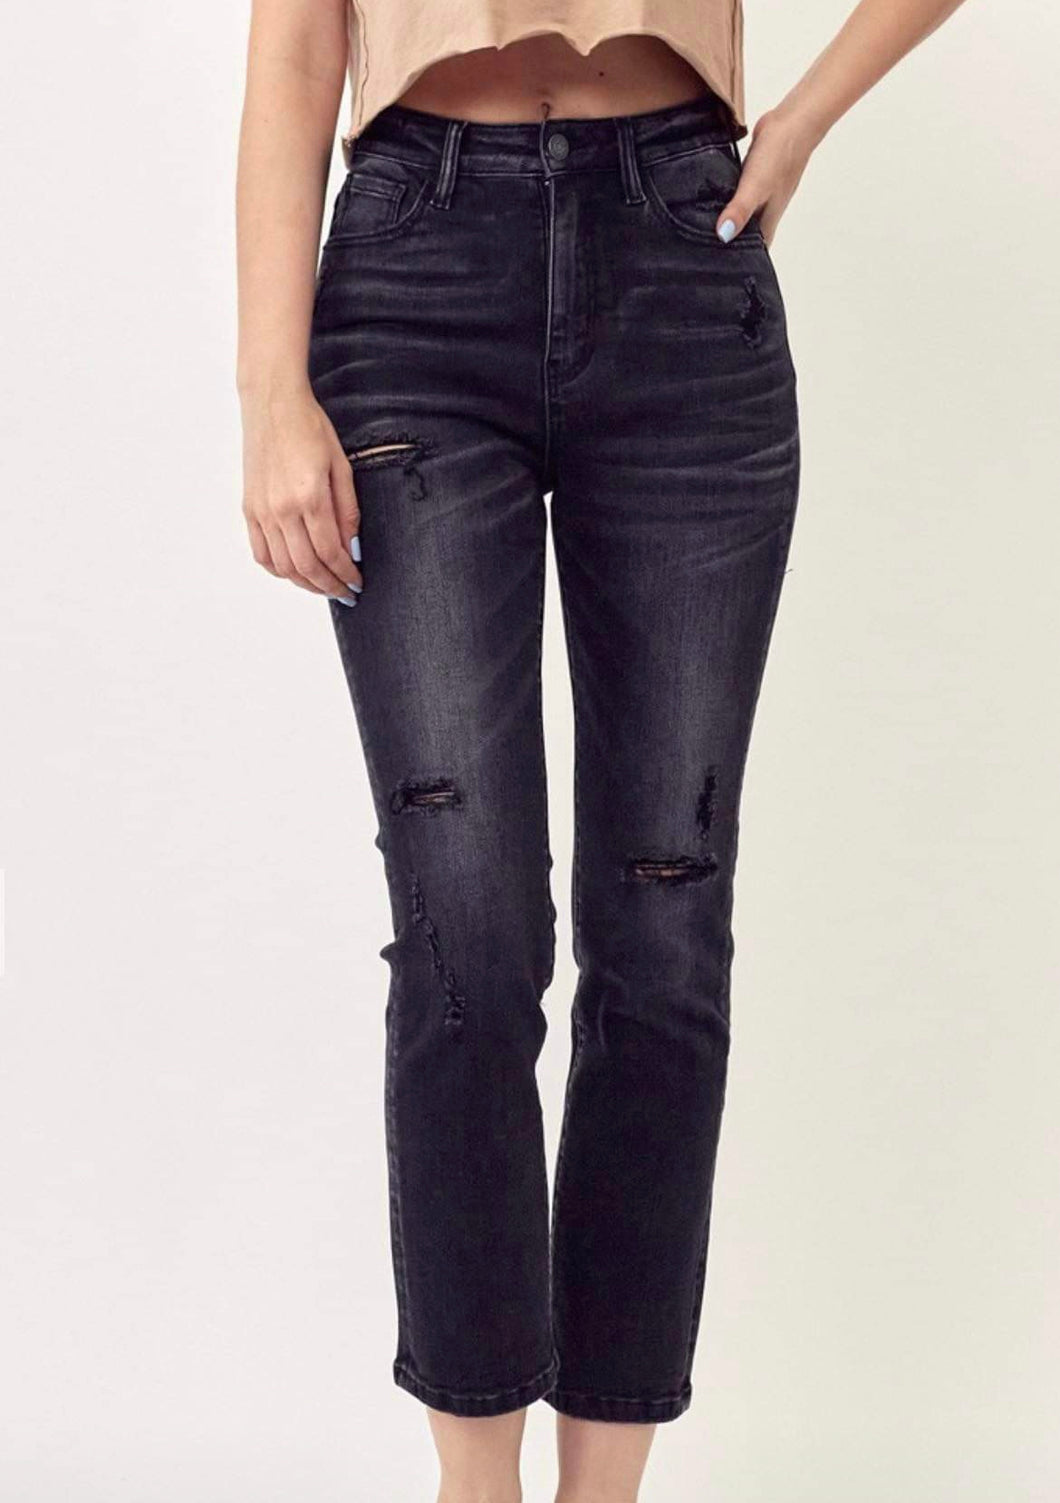 VINTAGE WASHED STRAIGHT LEG JEANS